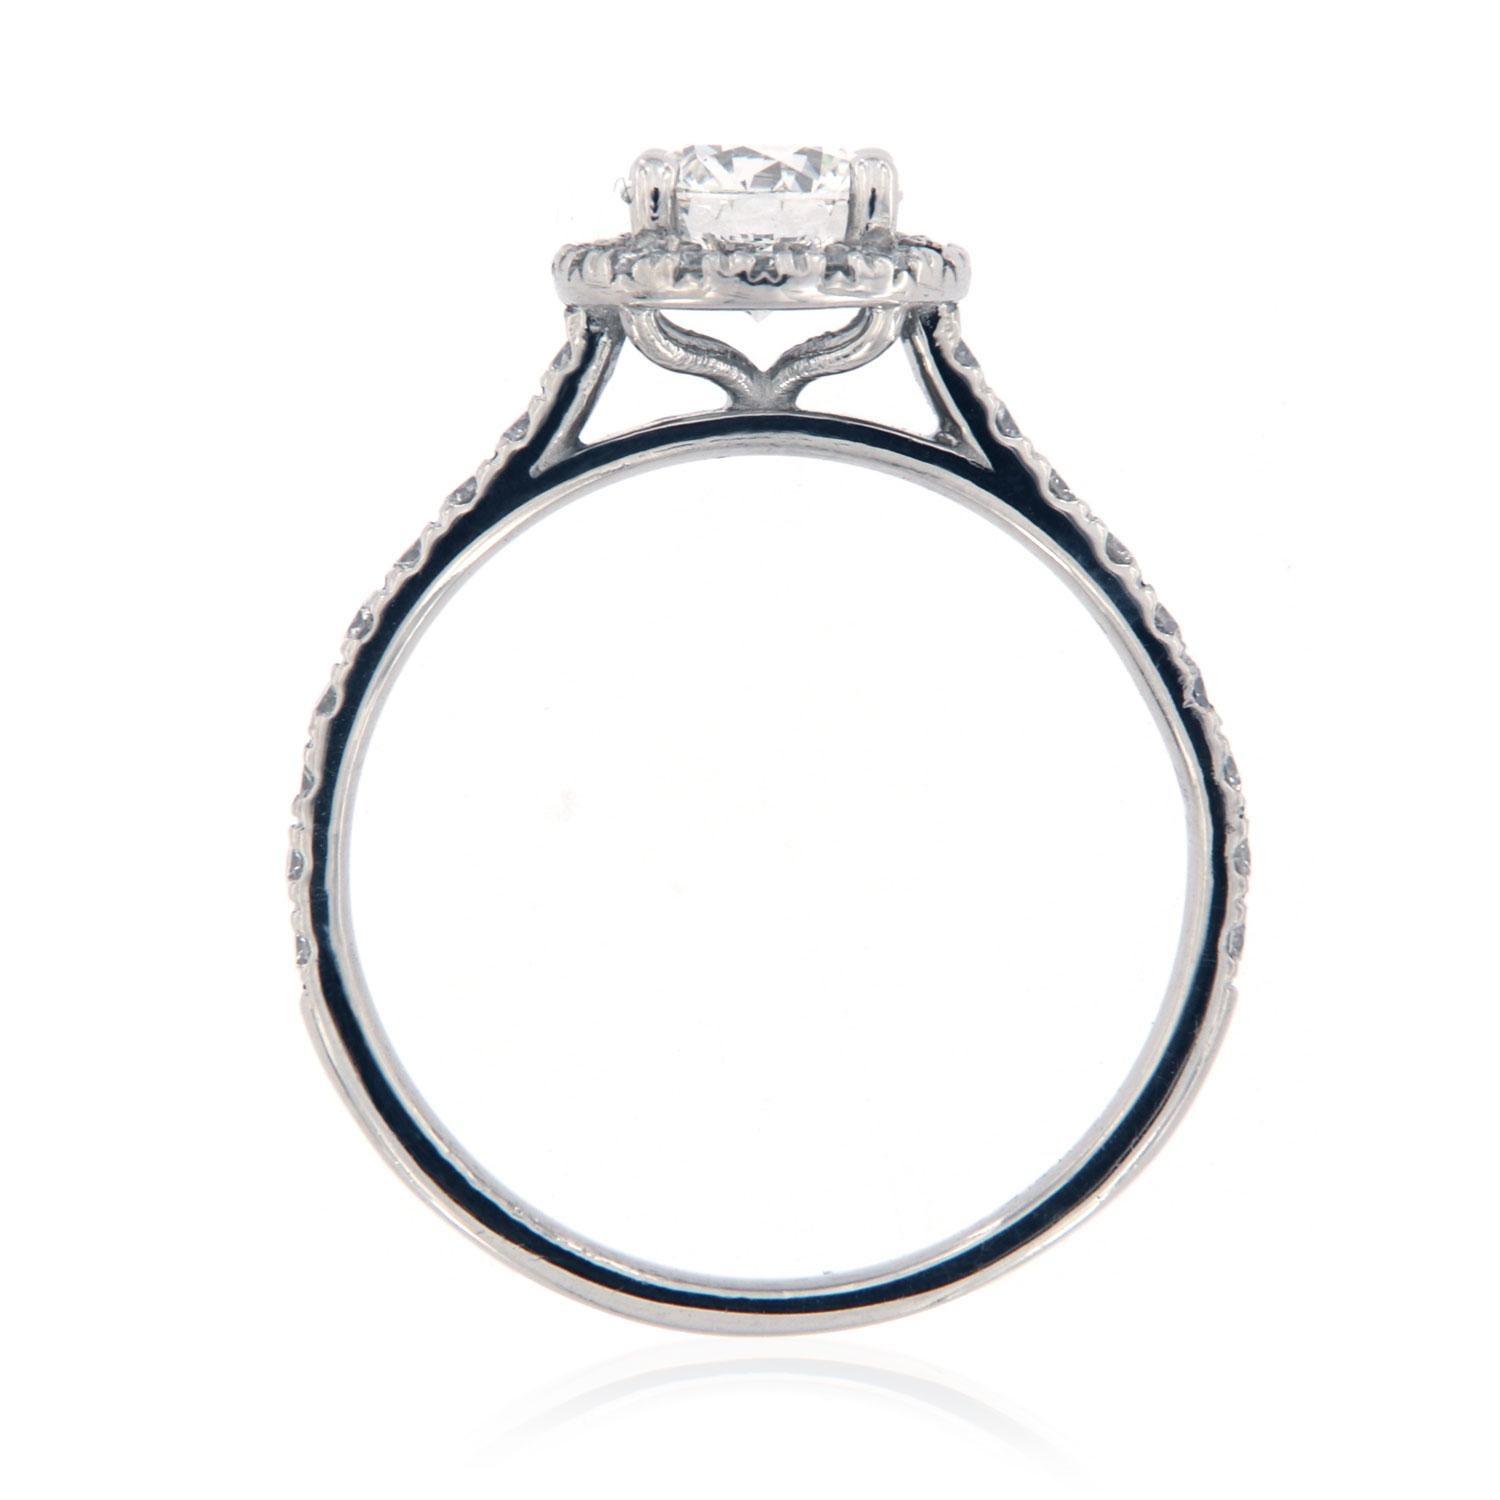 This Petite halo ring features perfectly matched brilliant round diamonds 1.3 mm each ( 1/4 Carat total weight)  Micro-Prong set on a 1.7 mm wide shank. In the center of the ring is set one Ideal cut GIA Certified diamond.
Shape: Round
Color: